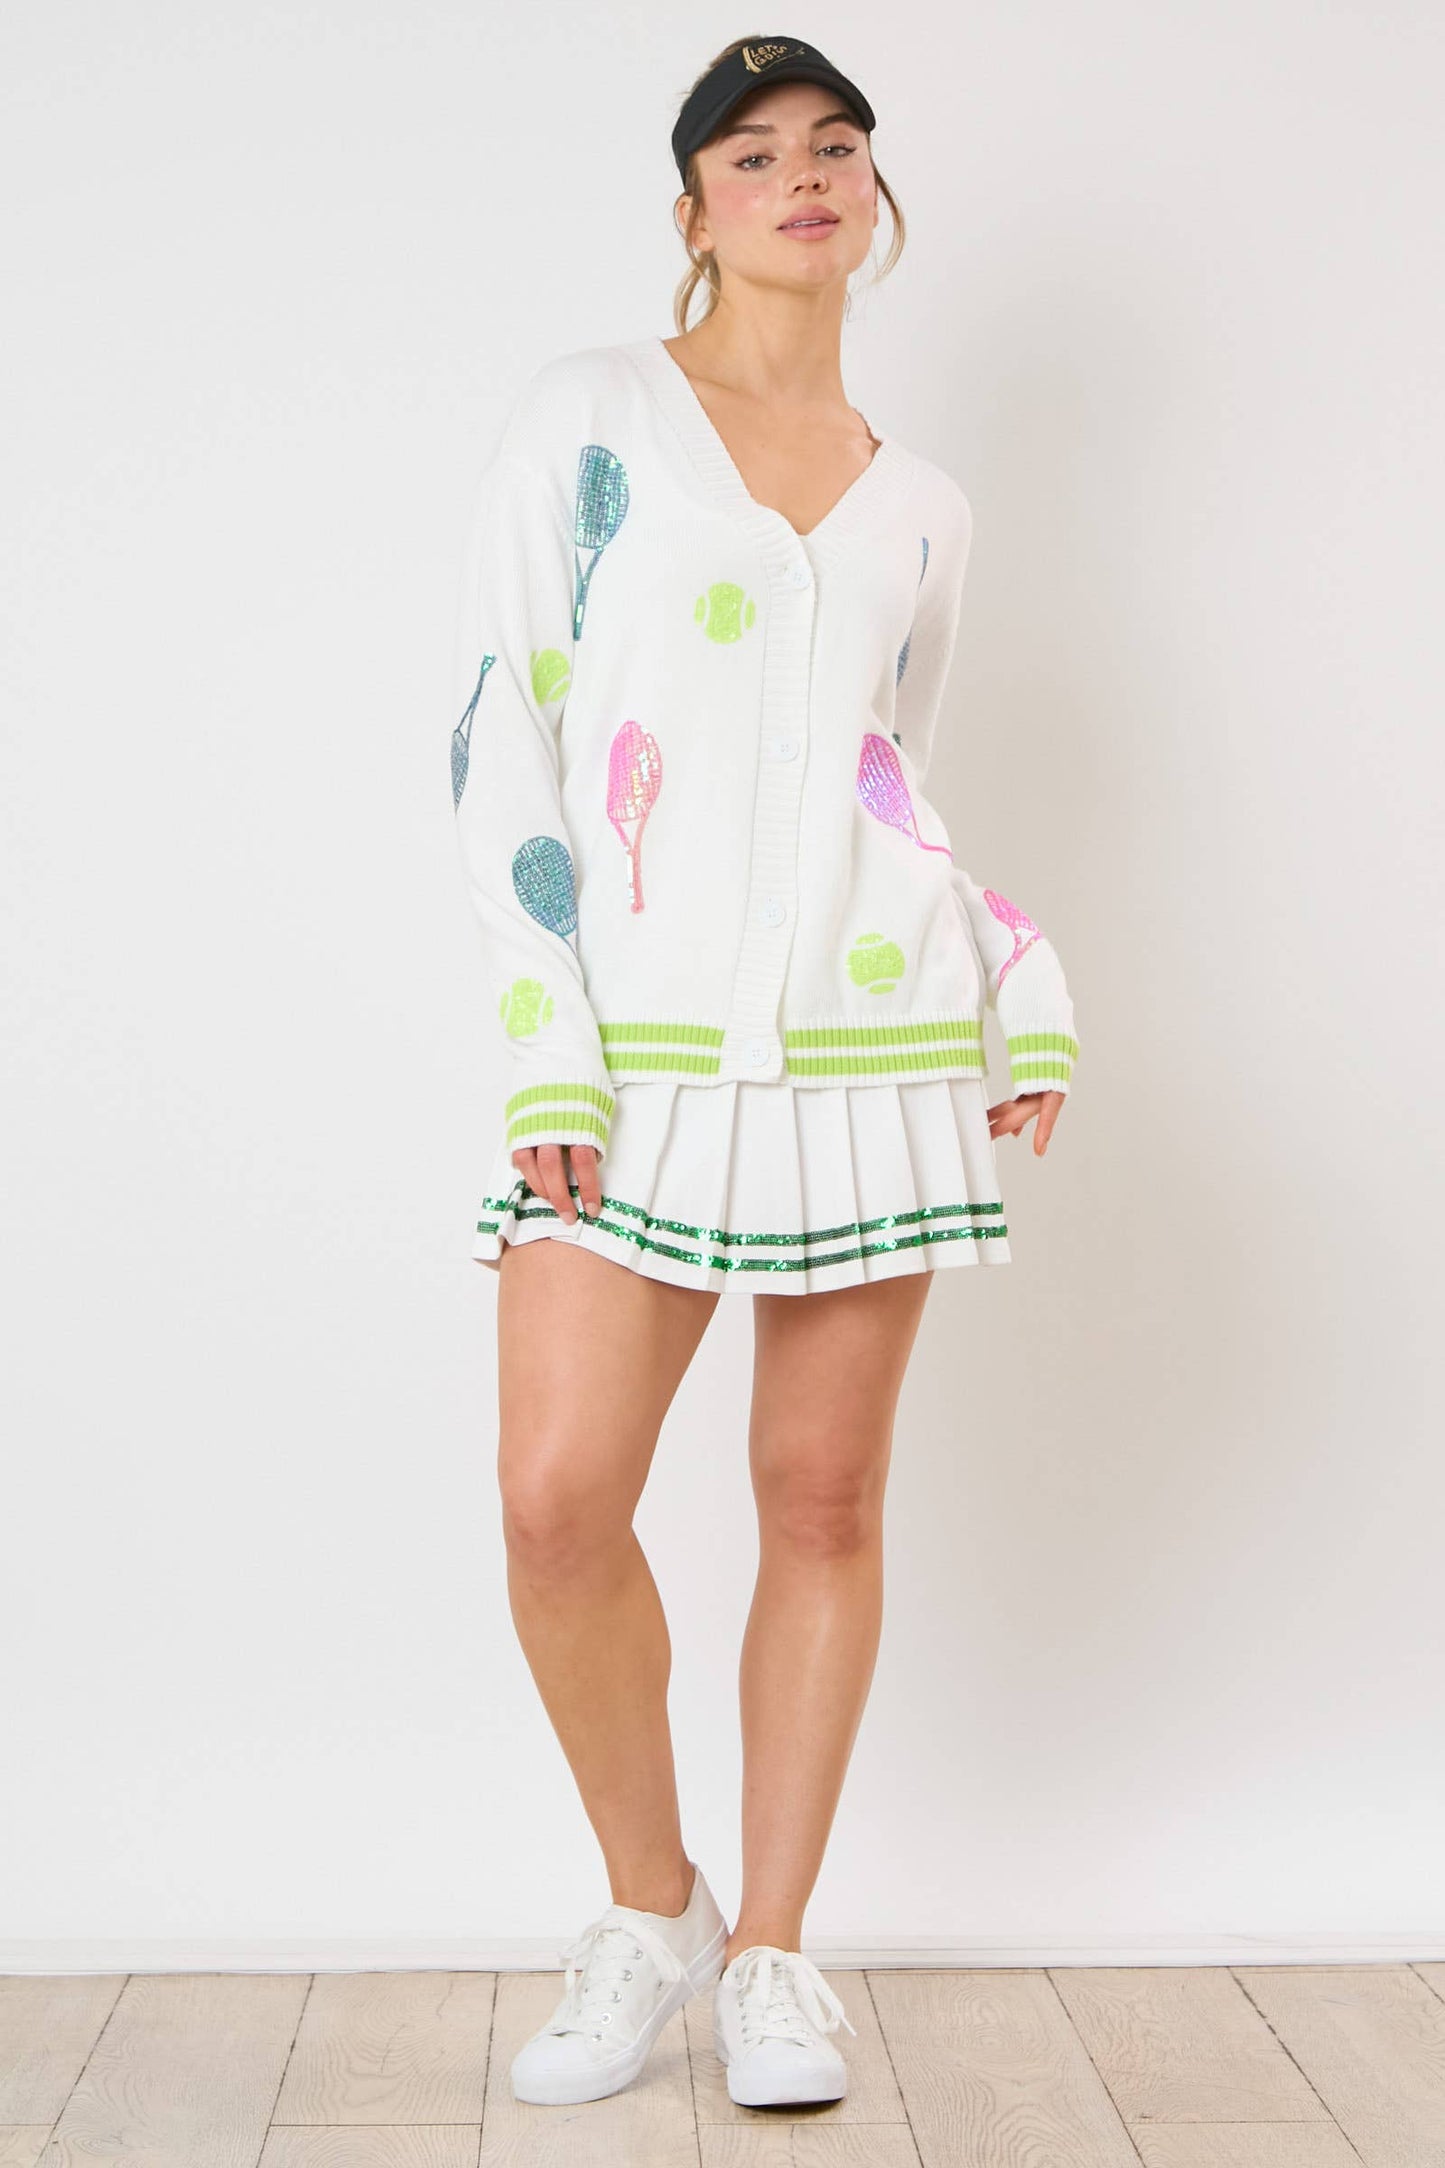 Tennis Sequins Embroidery Knit Cardigan